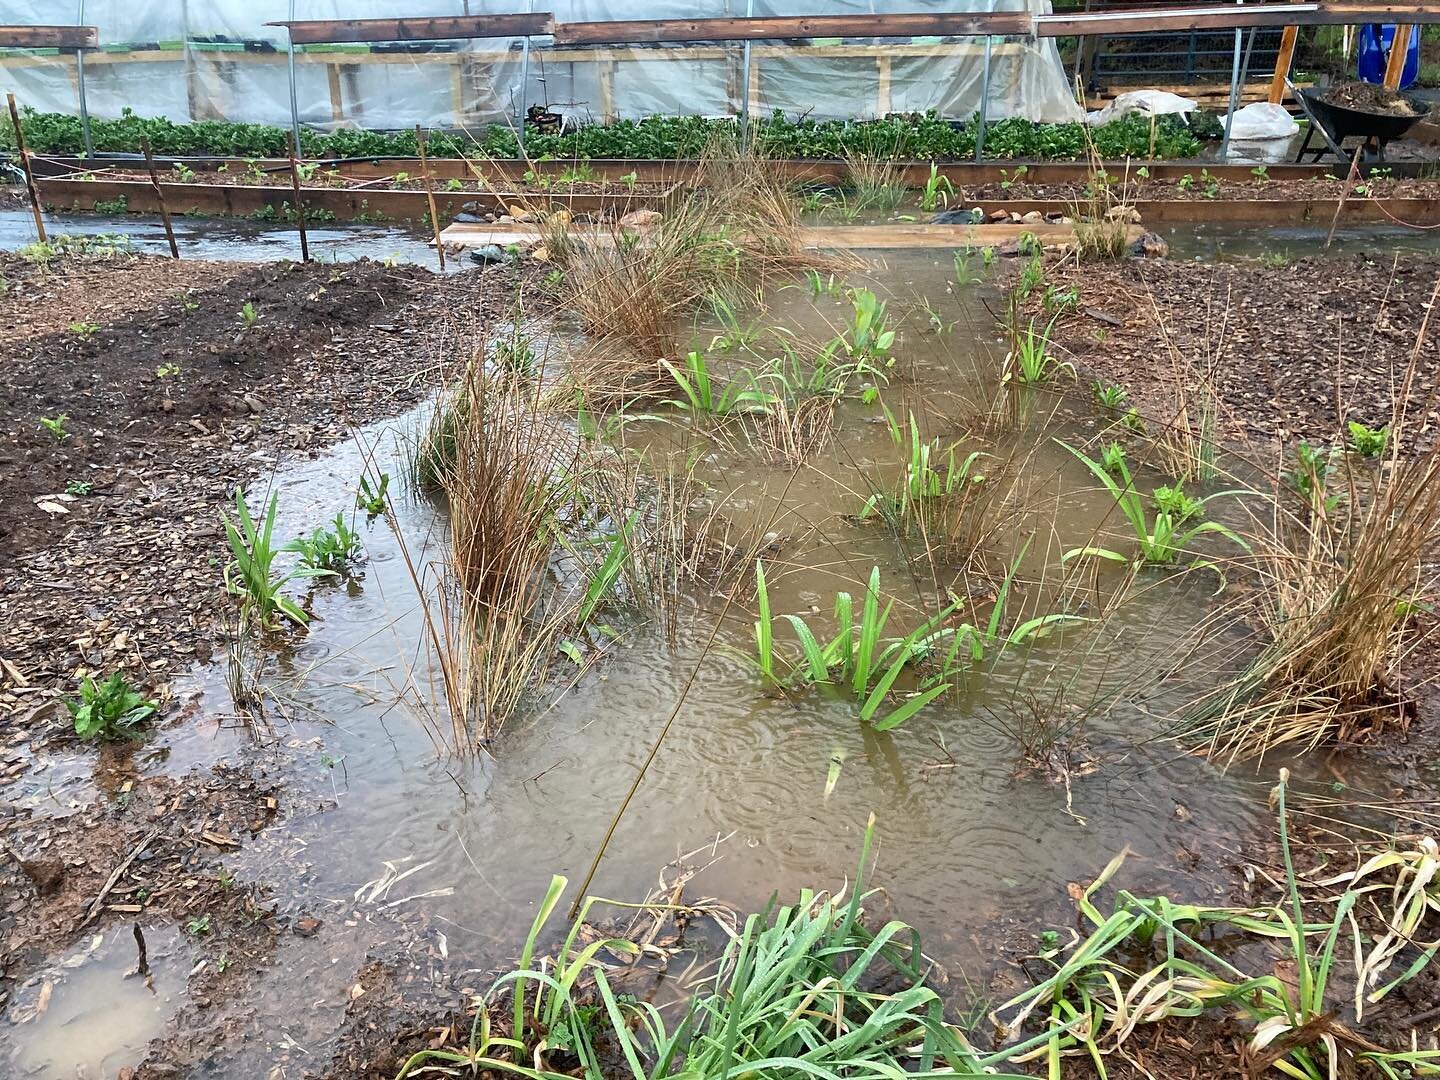 We haven&rsquo;t really seen any rain since we built the rain garden in late February.  Well, it seems as though we got over an inch of rain overnight and I&rsquo;d say the design is working!  It&rsquo;s totally flooded as planned in this area, but n